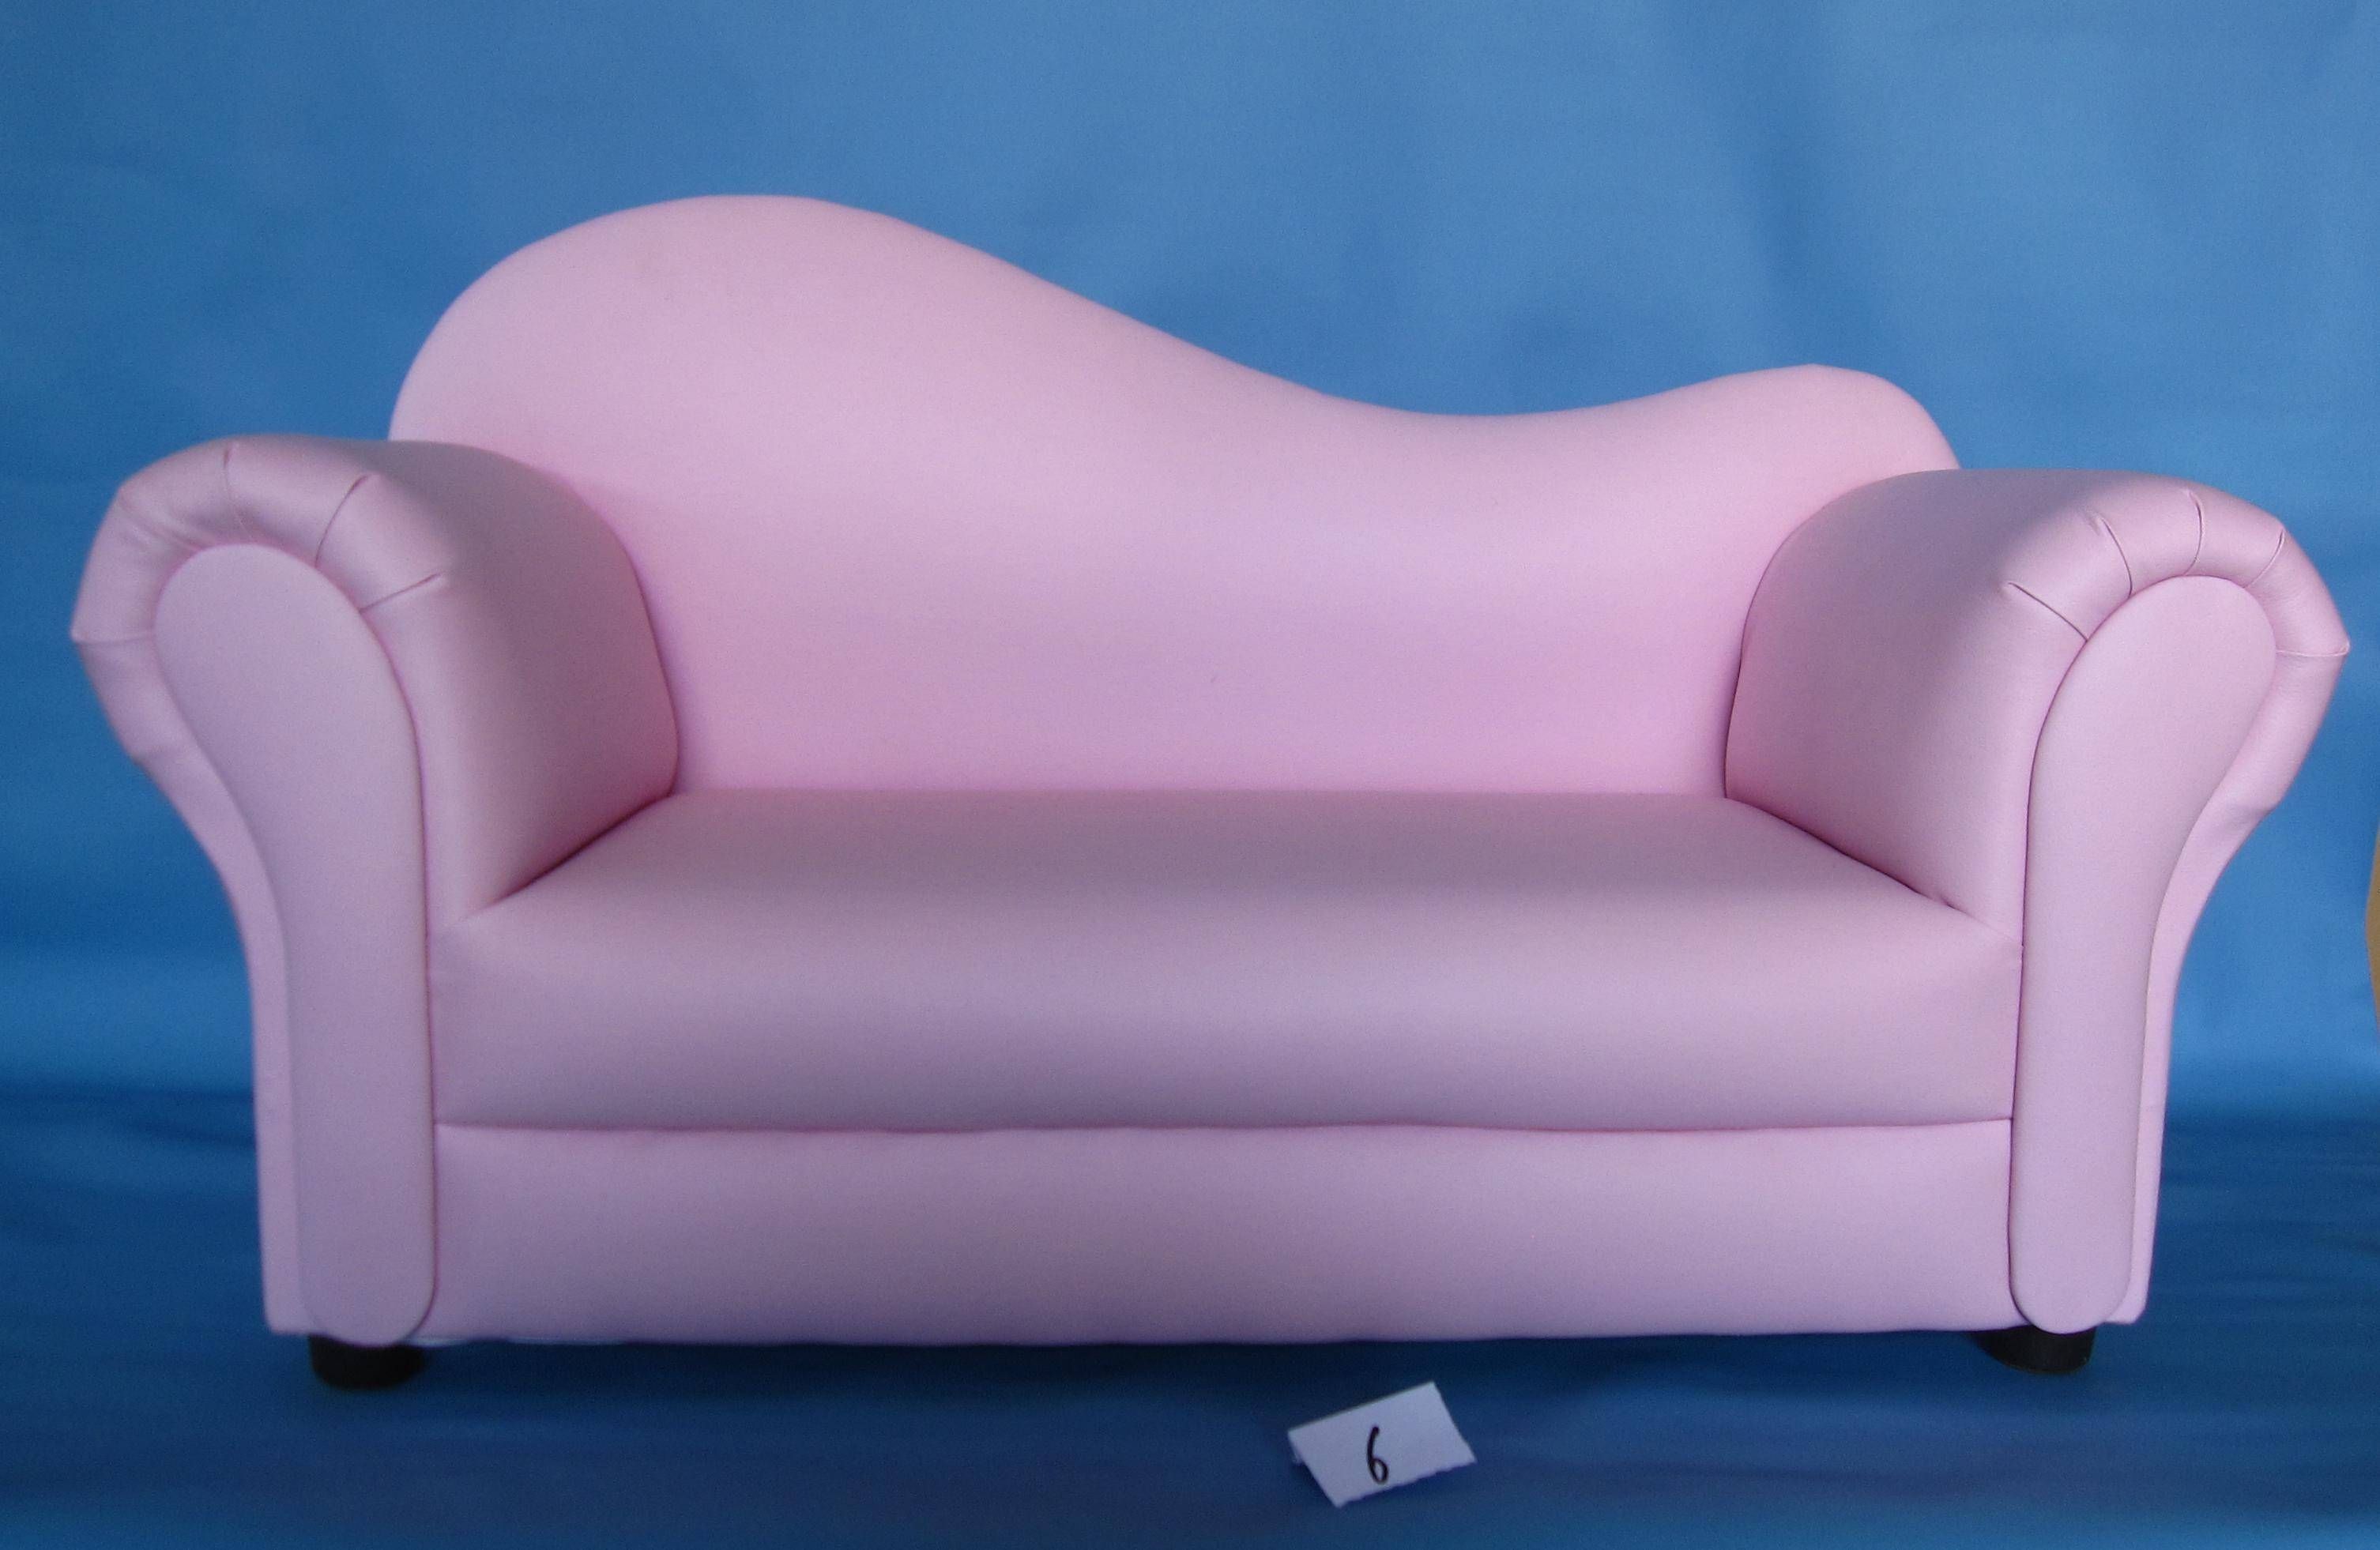 Sofa Kids High Quality Inflatable Sofa Chair From Regarding Inflatable Sofas And Chairs (View 11 of 15)